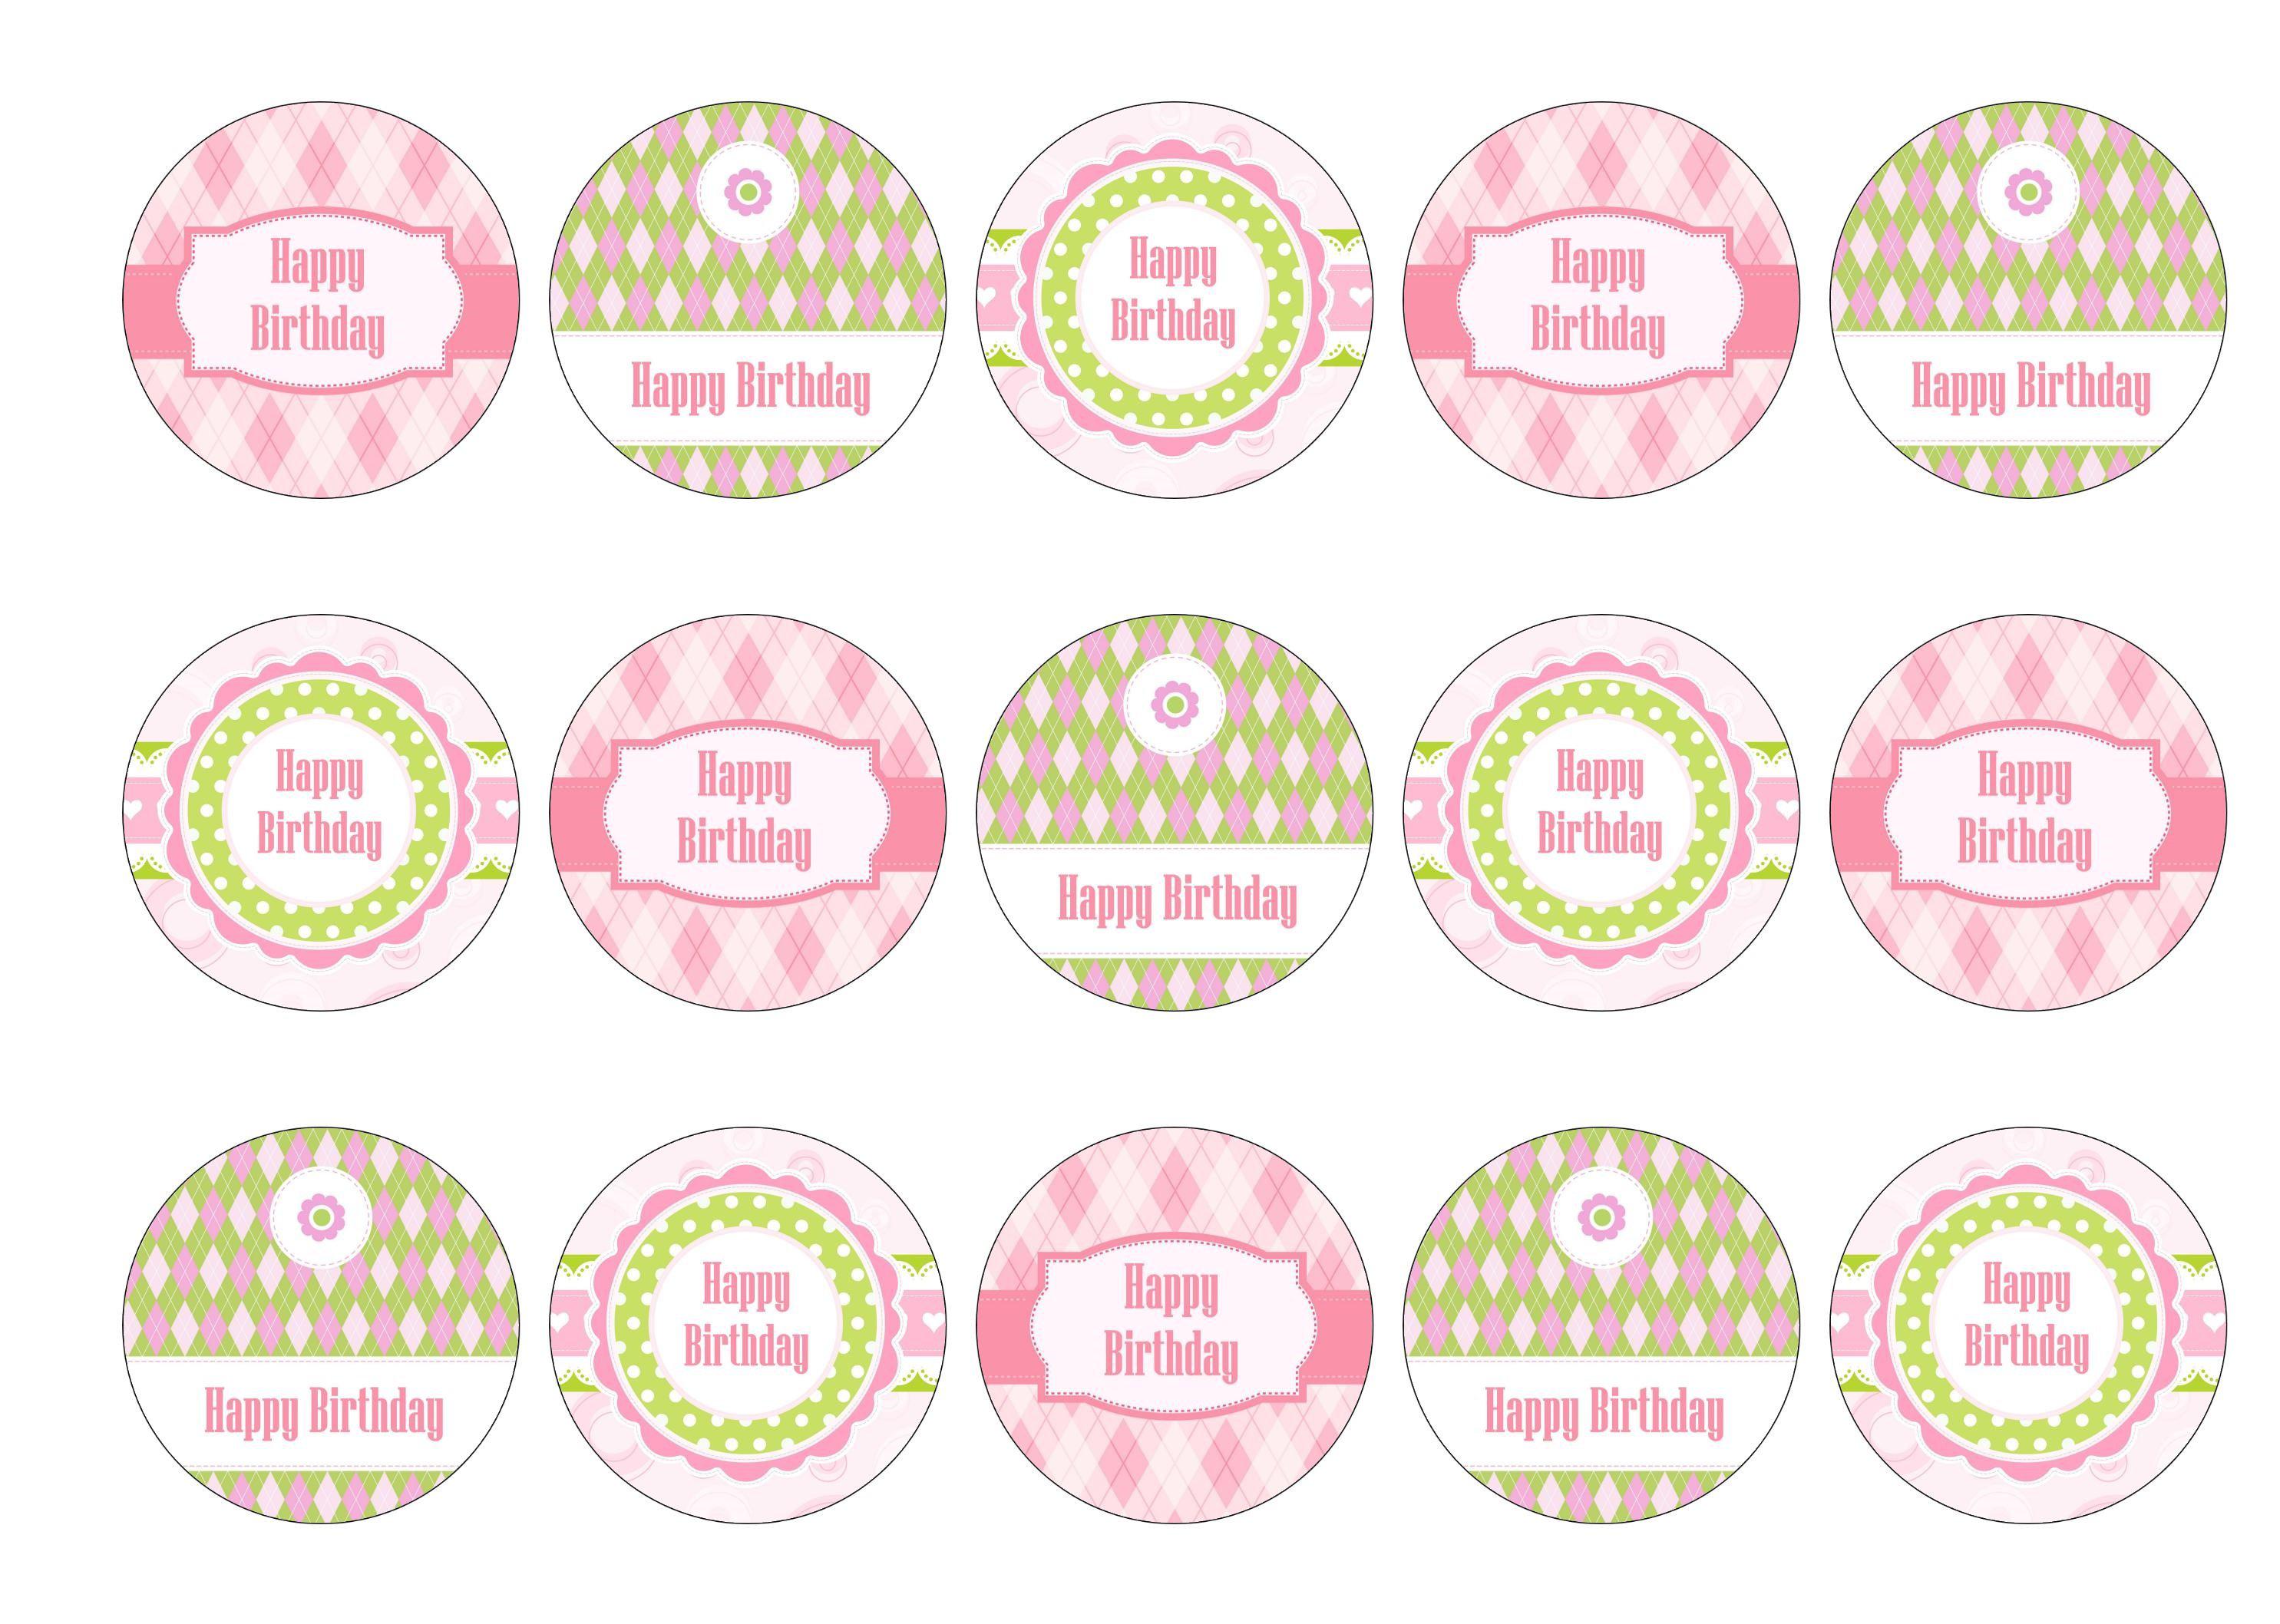 Printed edible cupcake toppers with diamond design